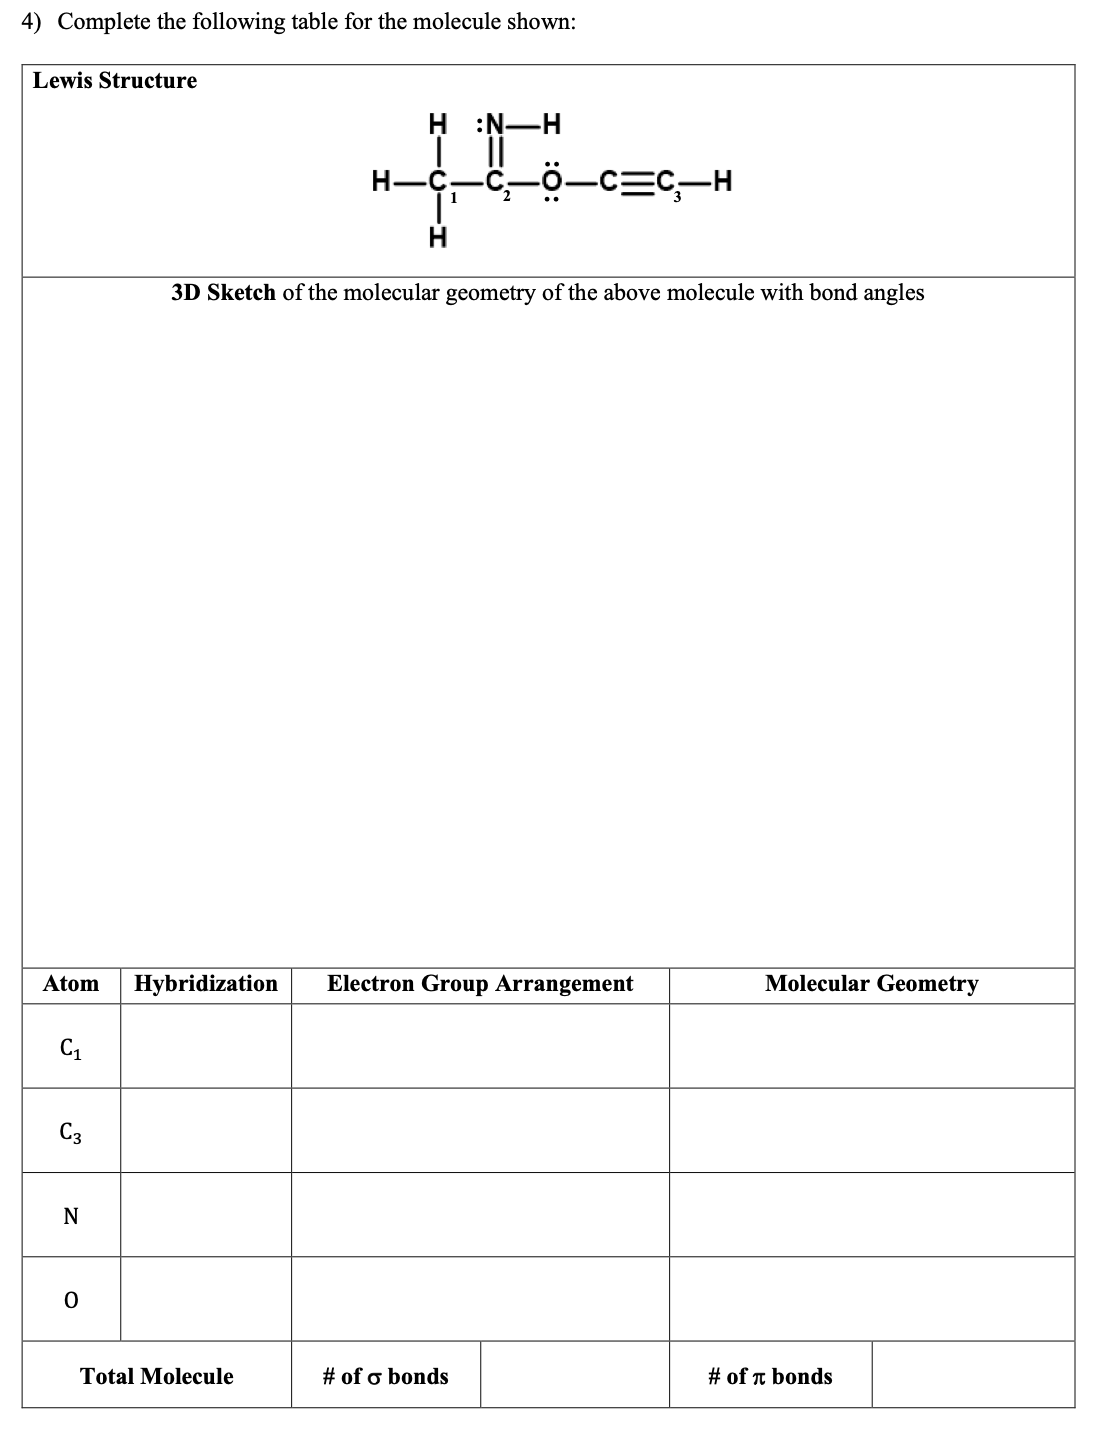 4) Complete the following table for the molecule shown:
Lewis Structure
H :N-H
ö-c=C-H
1
3D Sketch of the molecular geometry of the above molecule with bond angles
Atom
Hybridization
Electron Group Arrangement
Molecular Geometry
C3
Total Molecule
# of o bonds
# of n bonds
